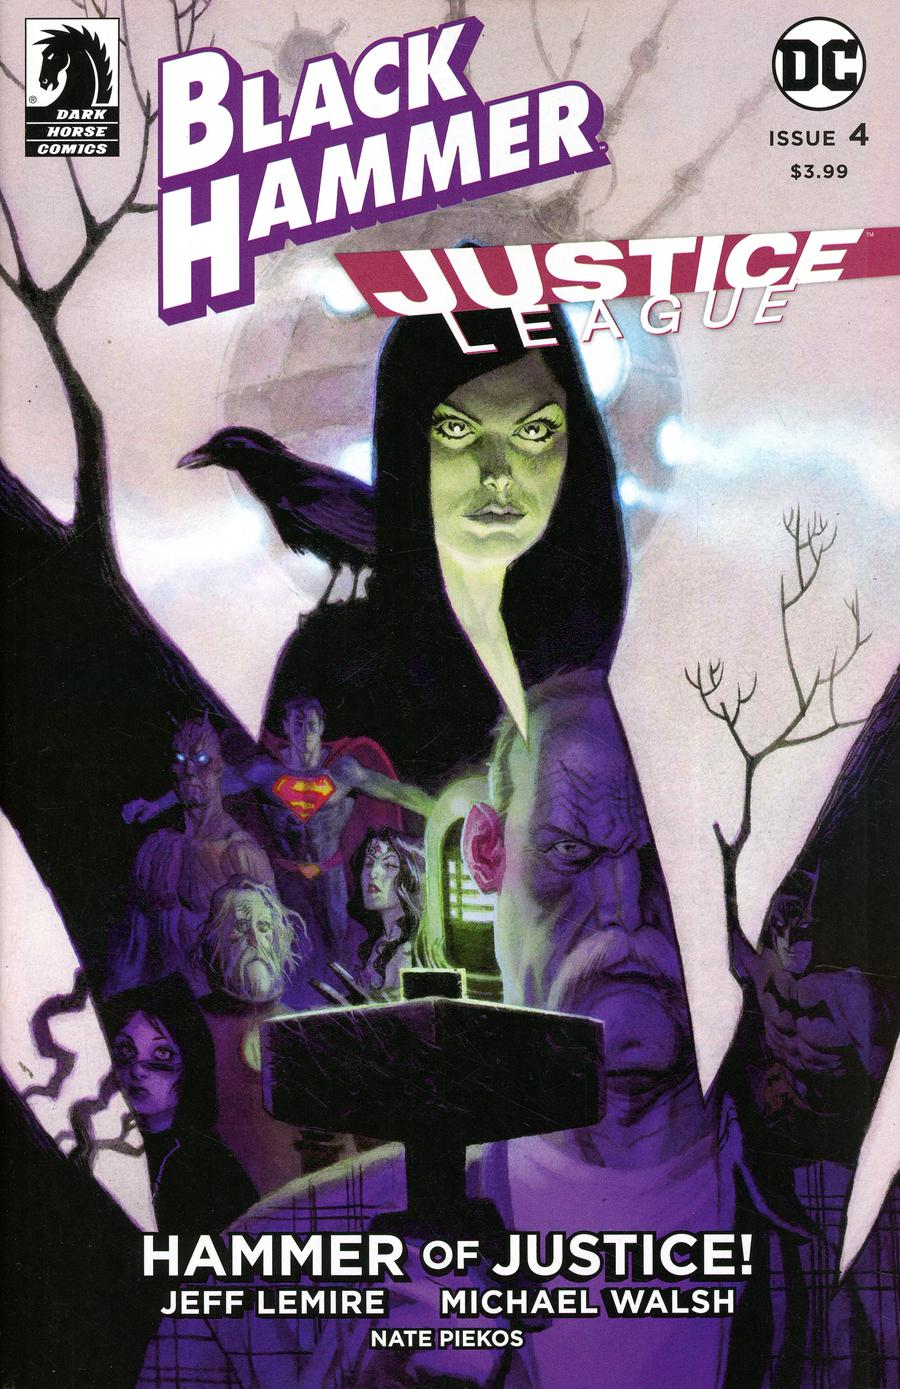 Black Hammer Justice League Hammer Of Justice #4 Cover B Variant Andrew Robinson Cover